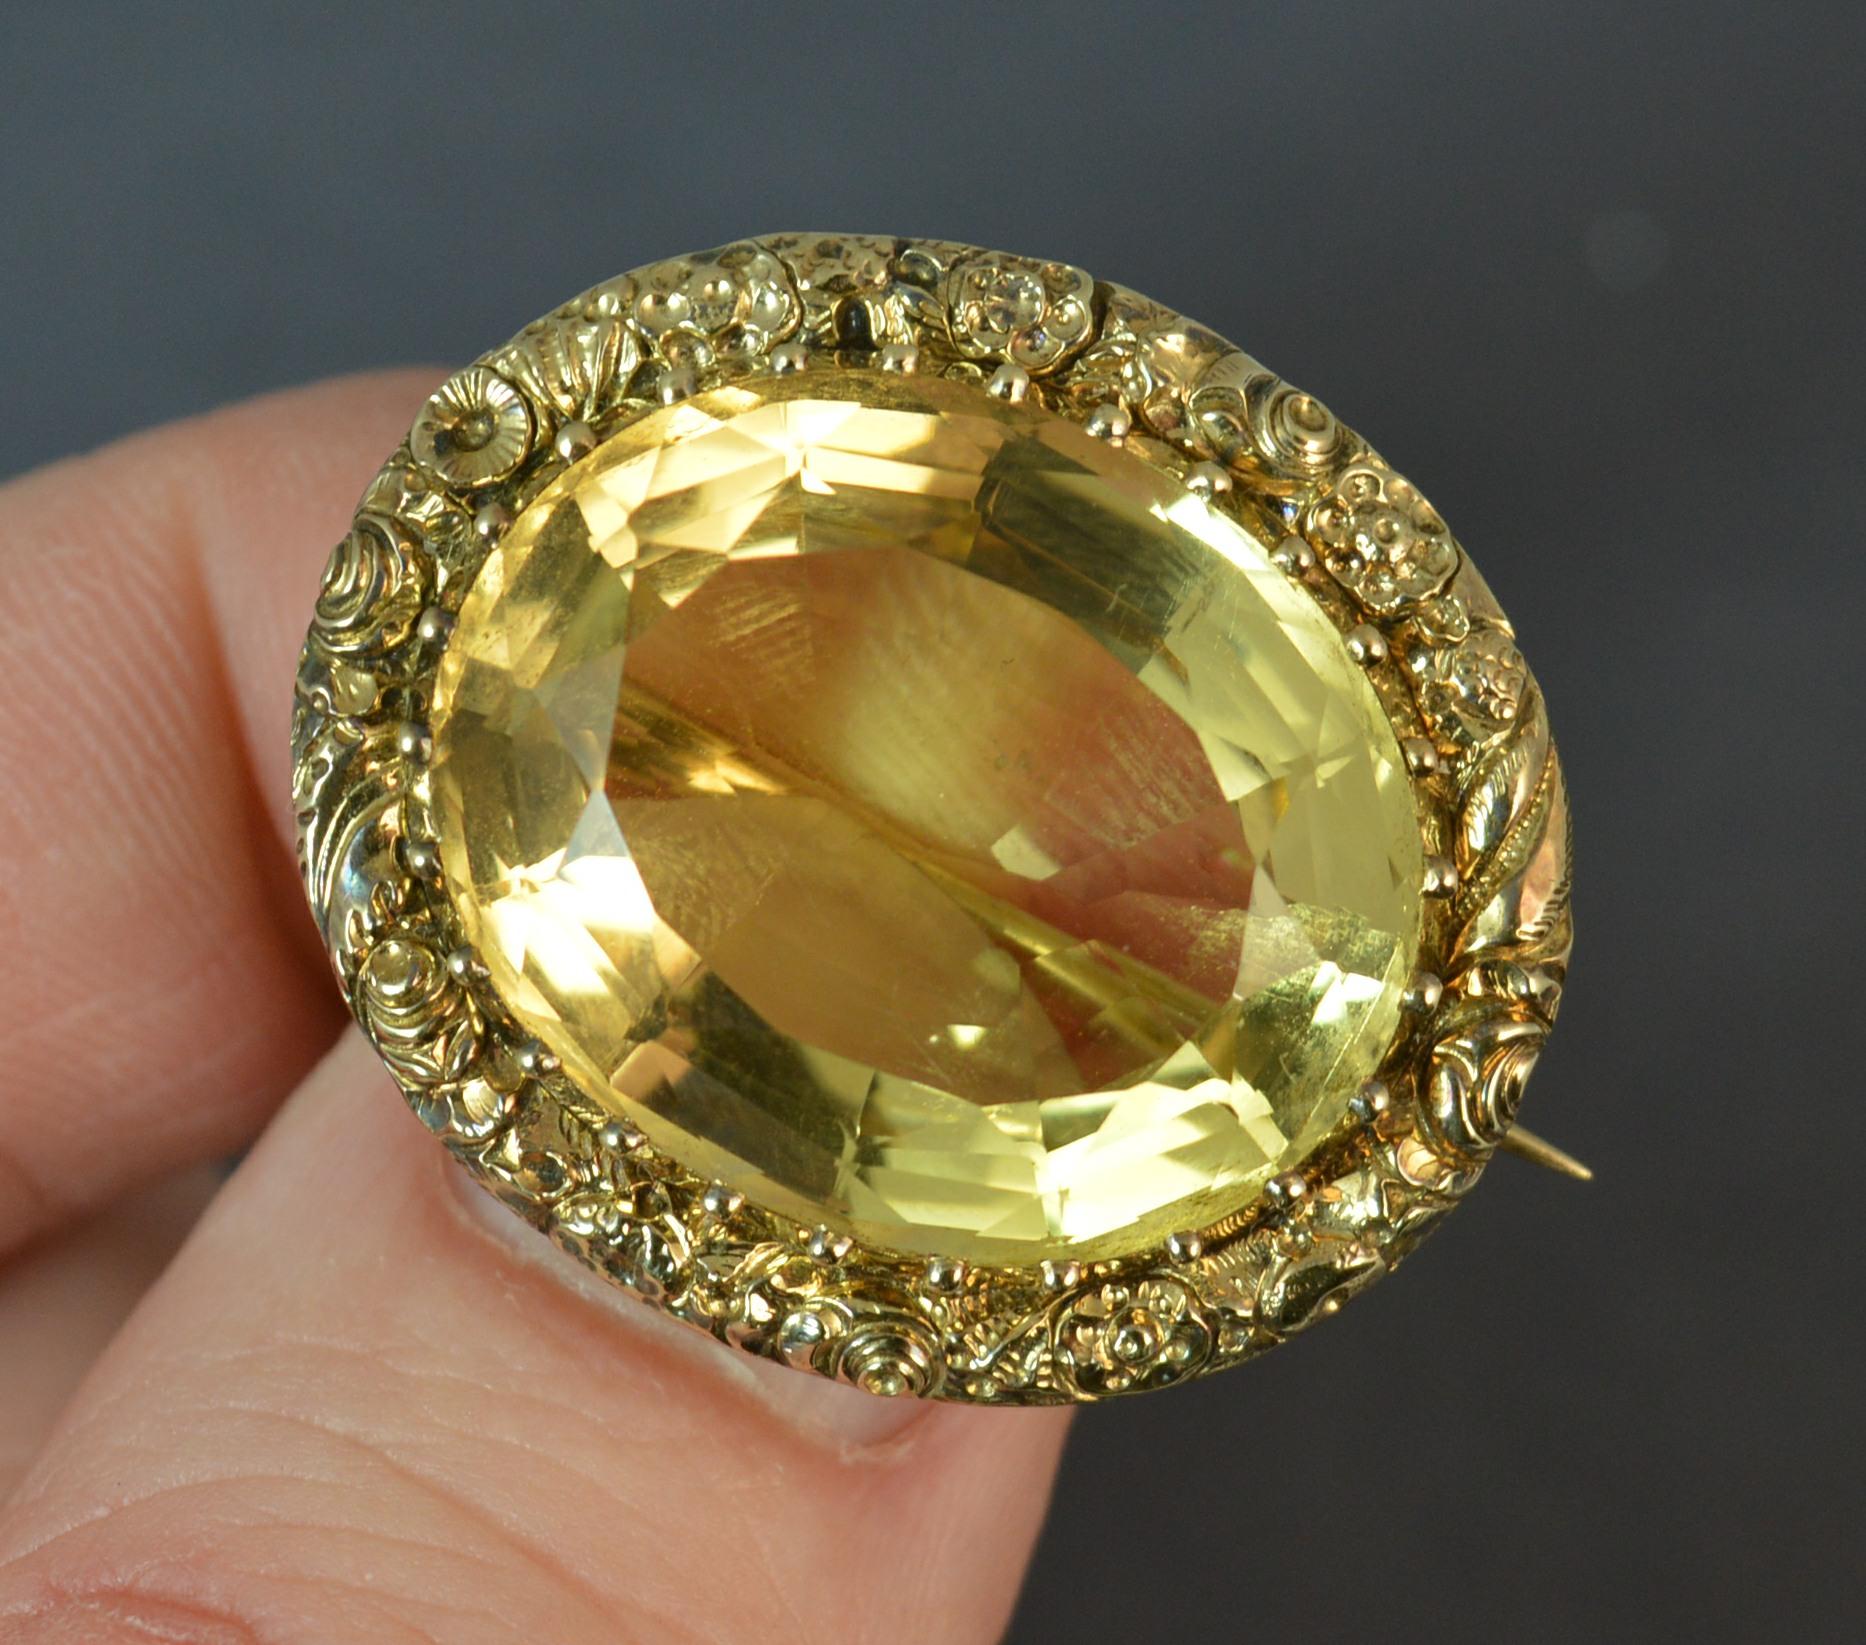 George III Large Georgian 15 Carat Gold and Citrine Solitaire Brooch